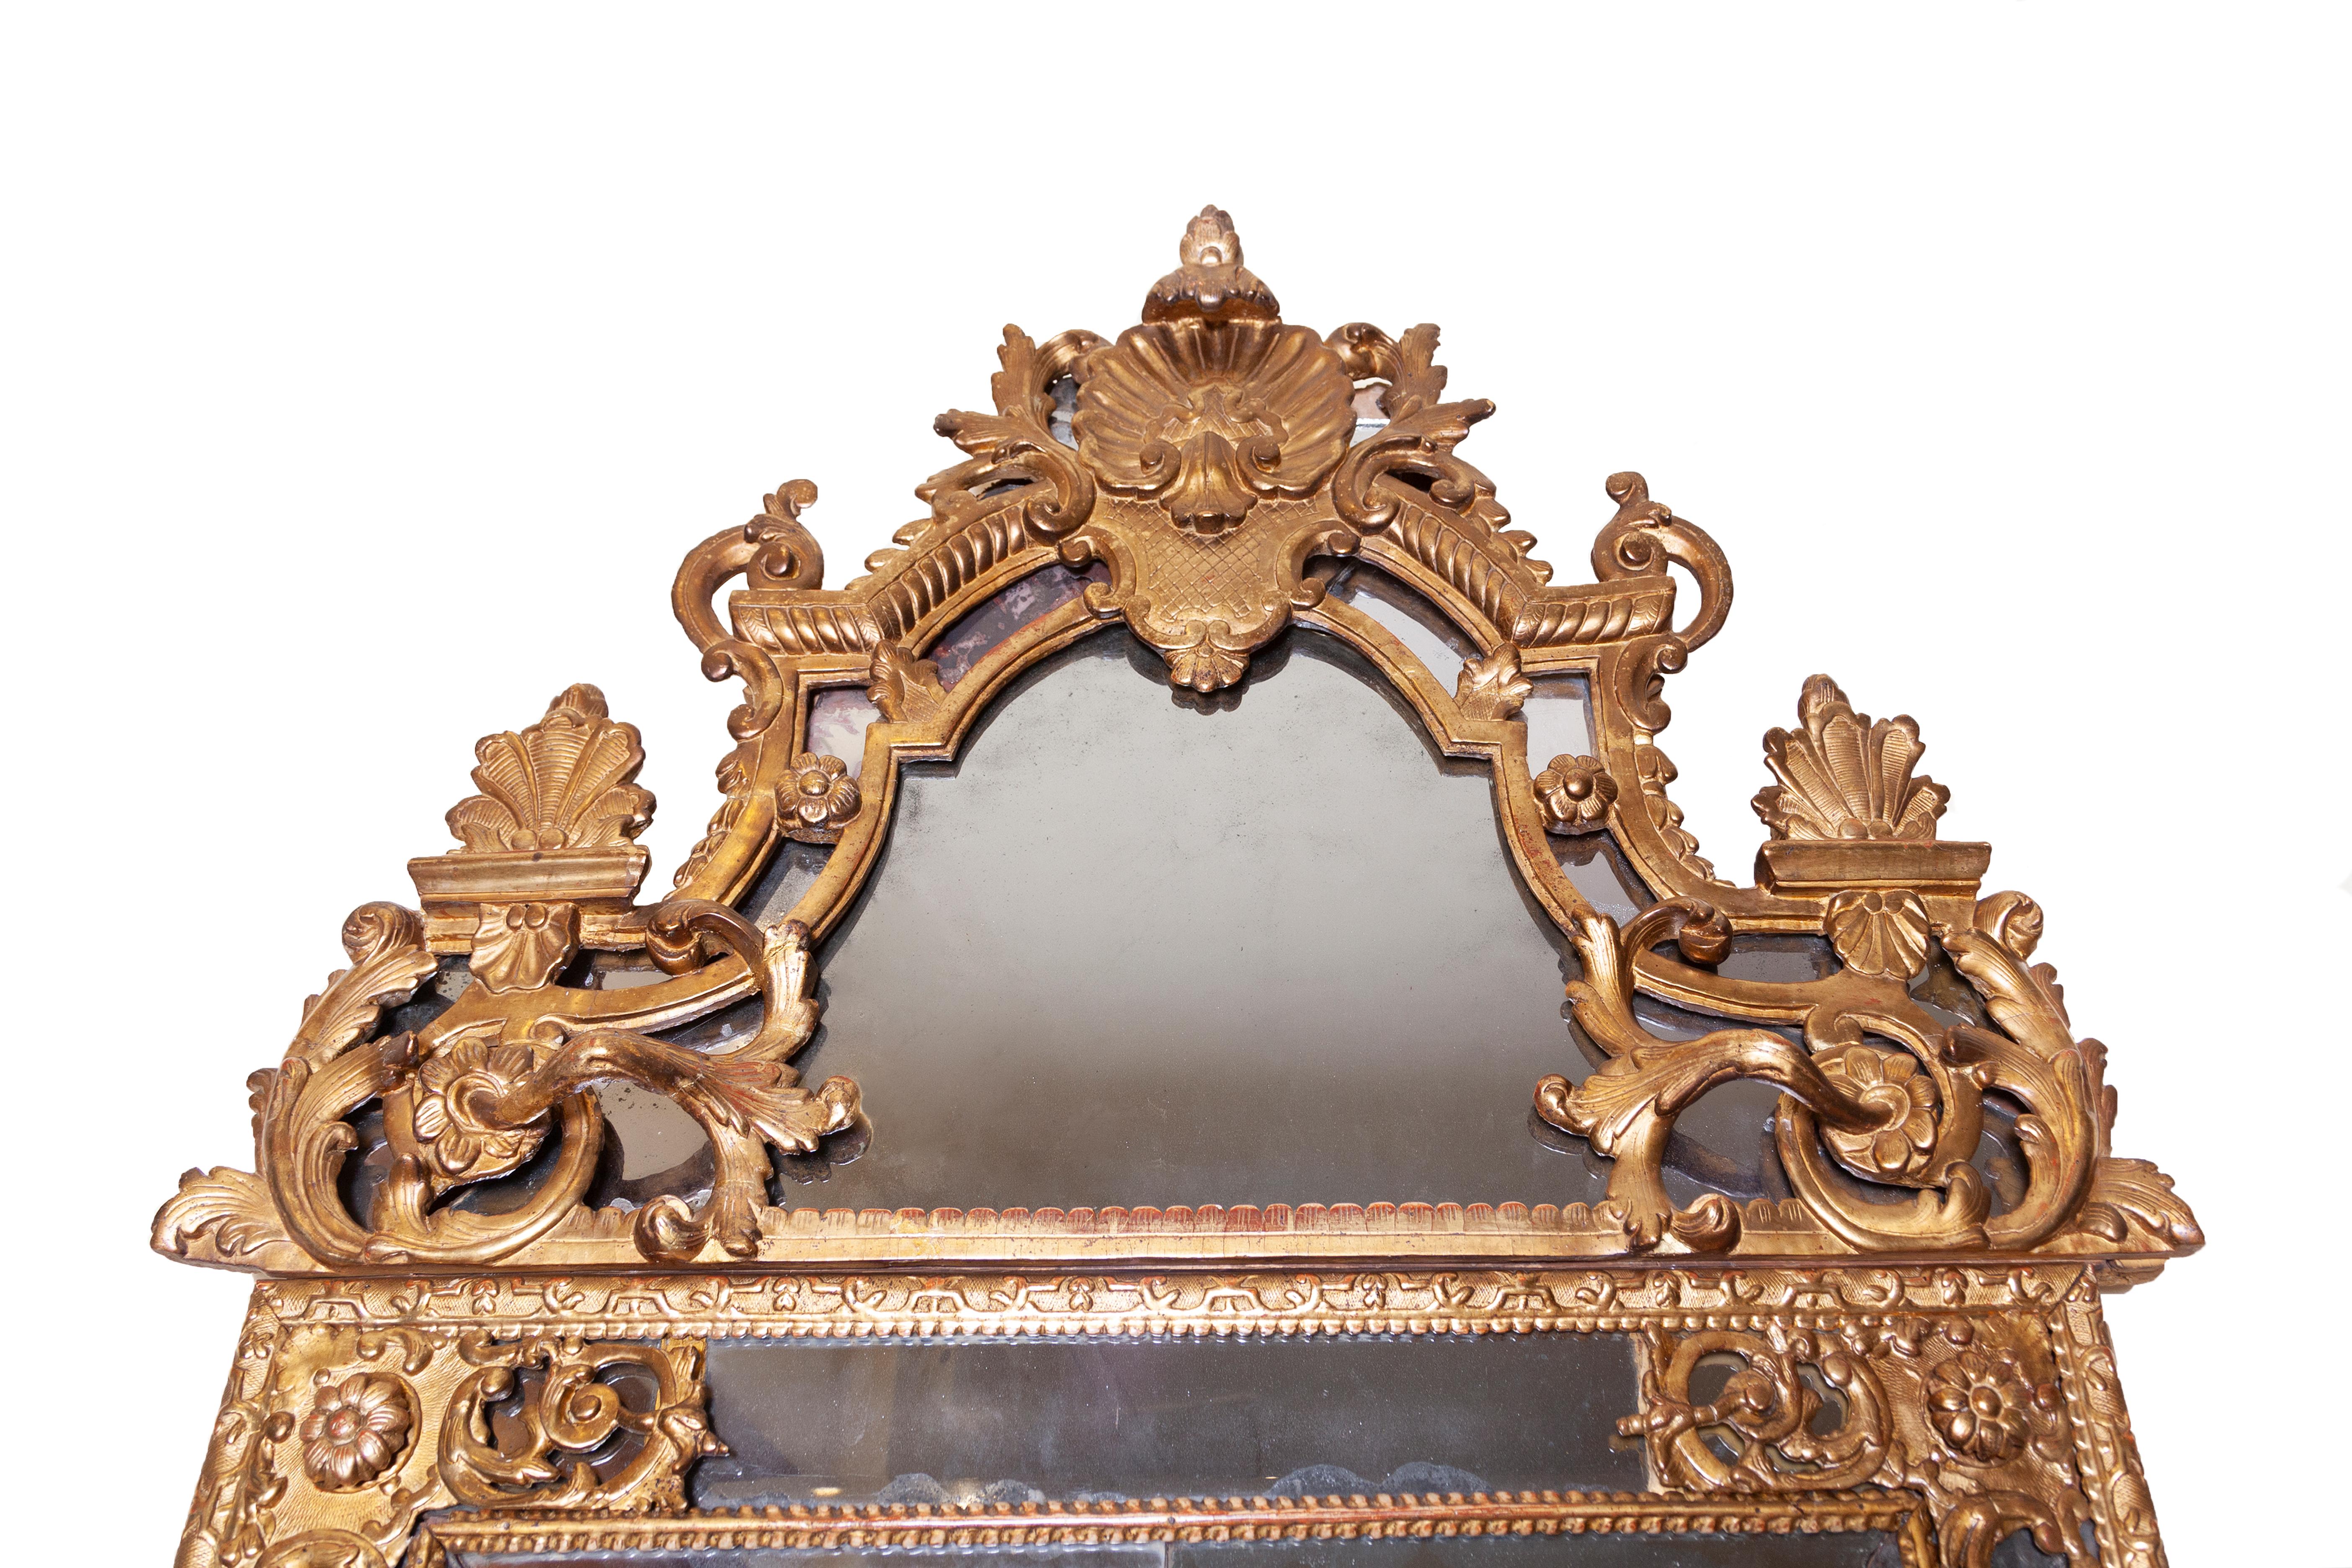 Régence Early 18th Century Gold Regency Giltwood Mirror For Sale